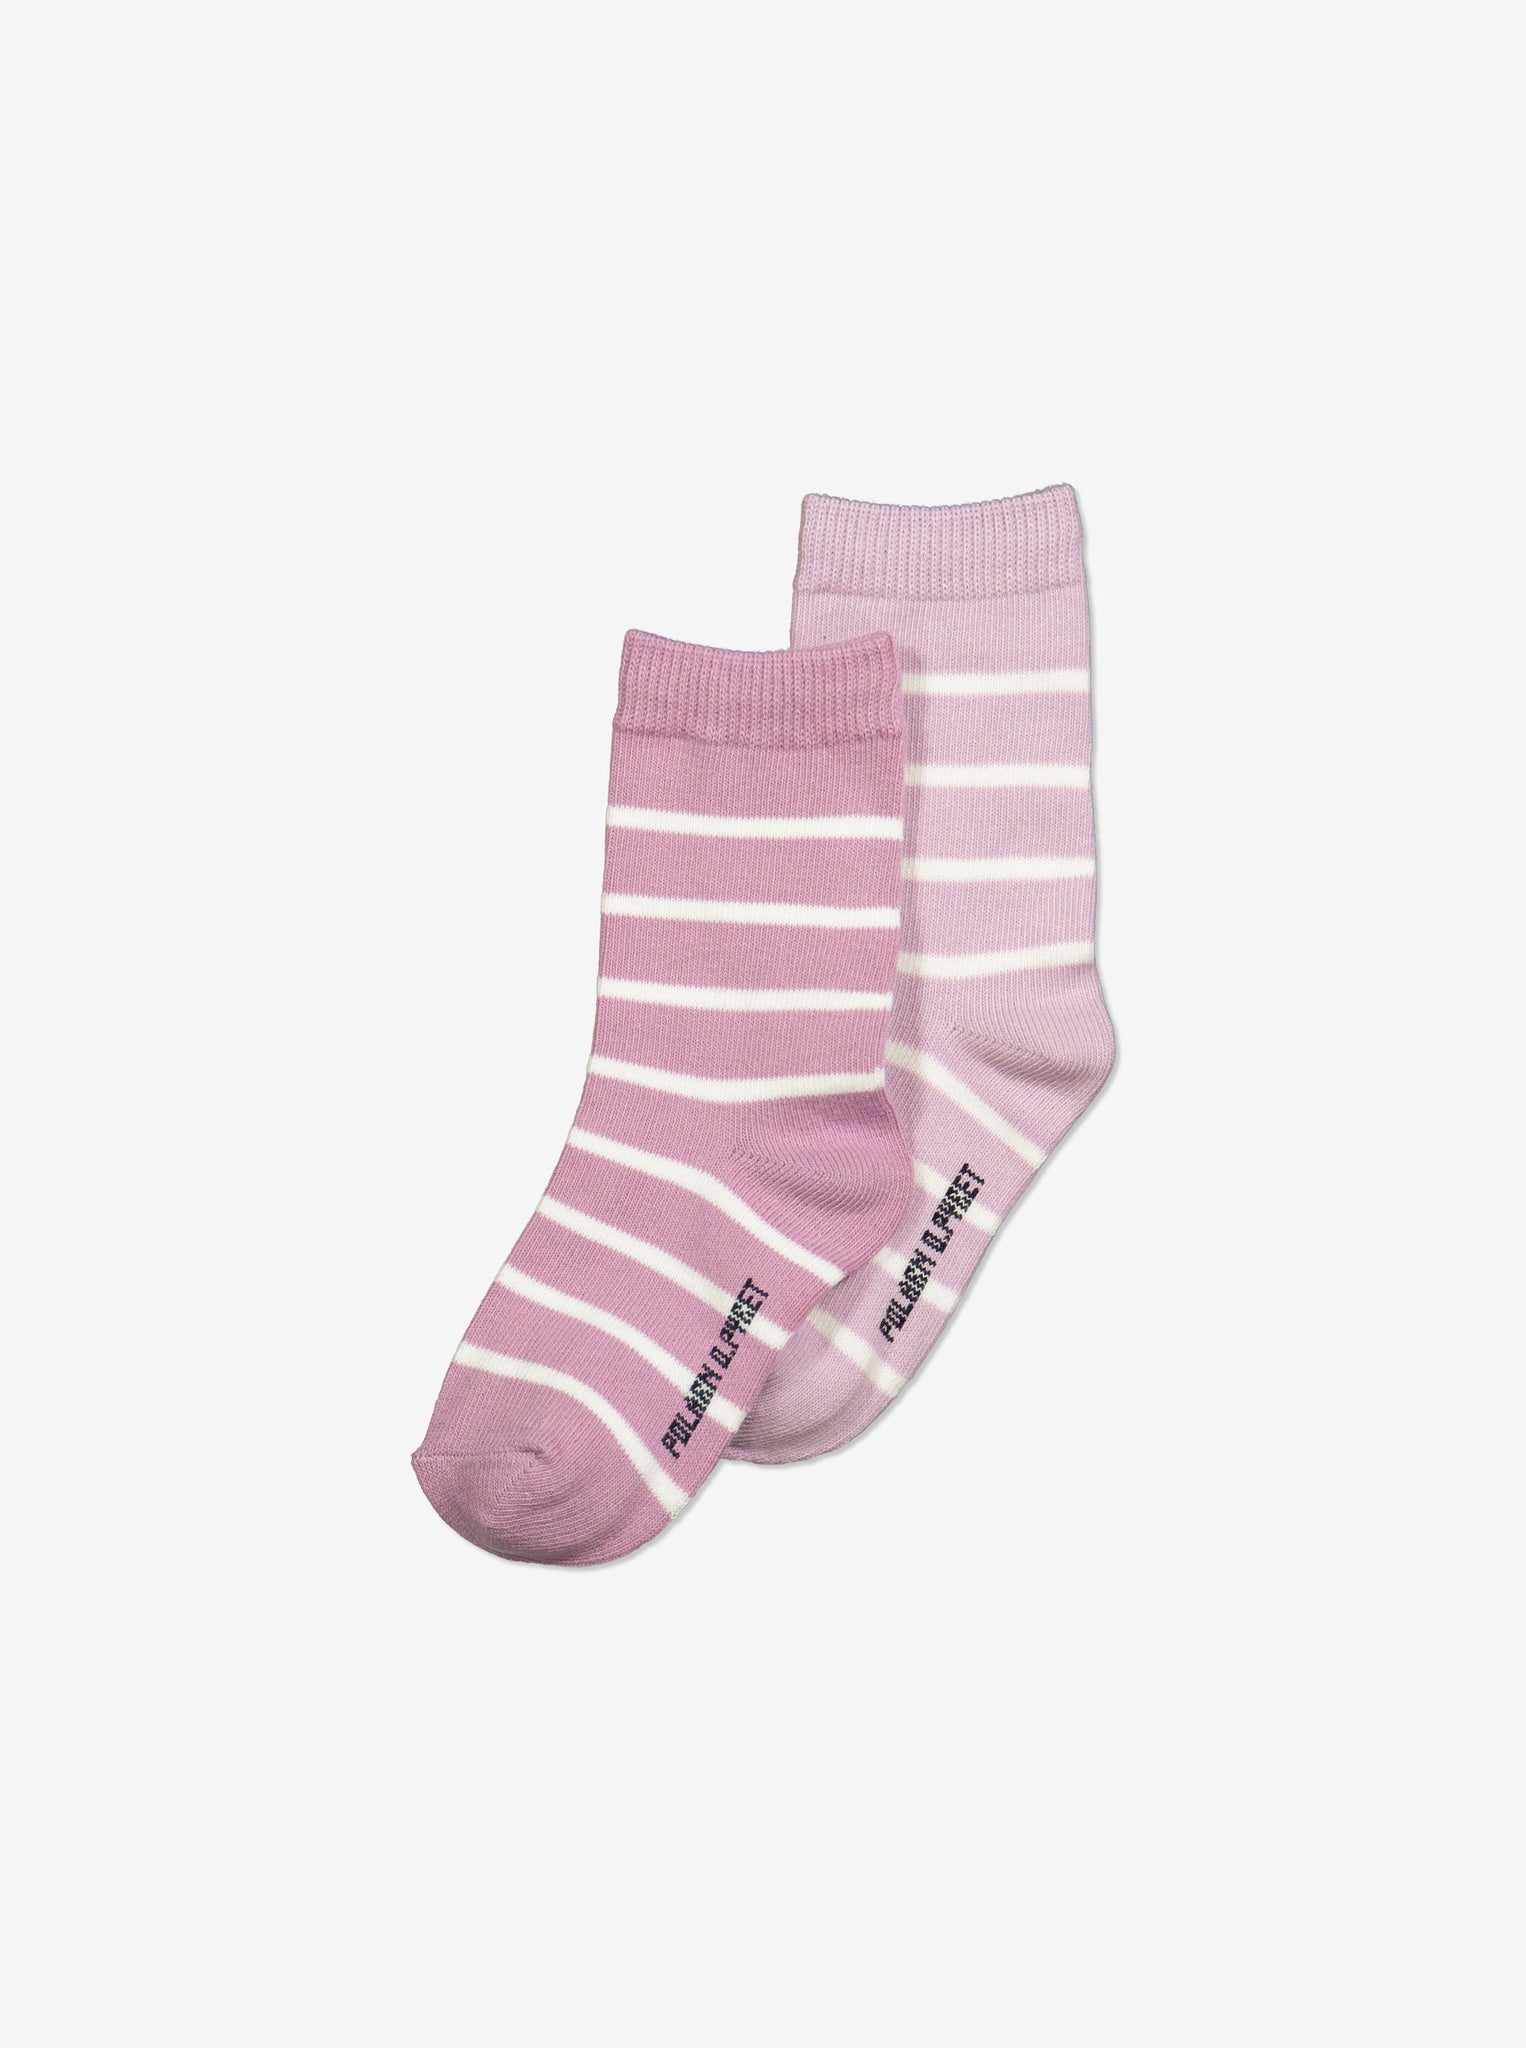  Organic Pink Kids Socks Multipack from Polarn O. Pyret Kidswear. Made from sustainably sourced materials.